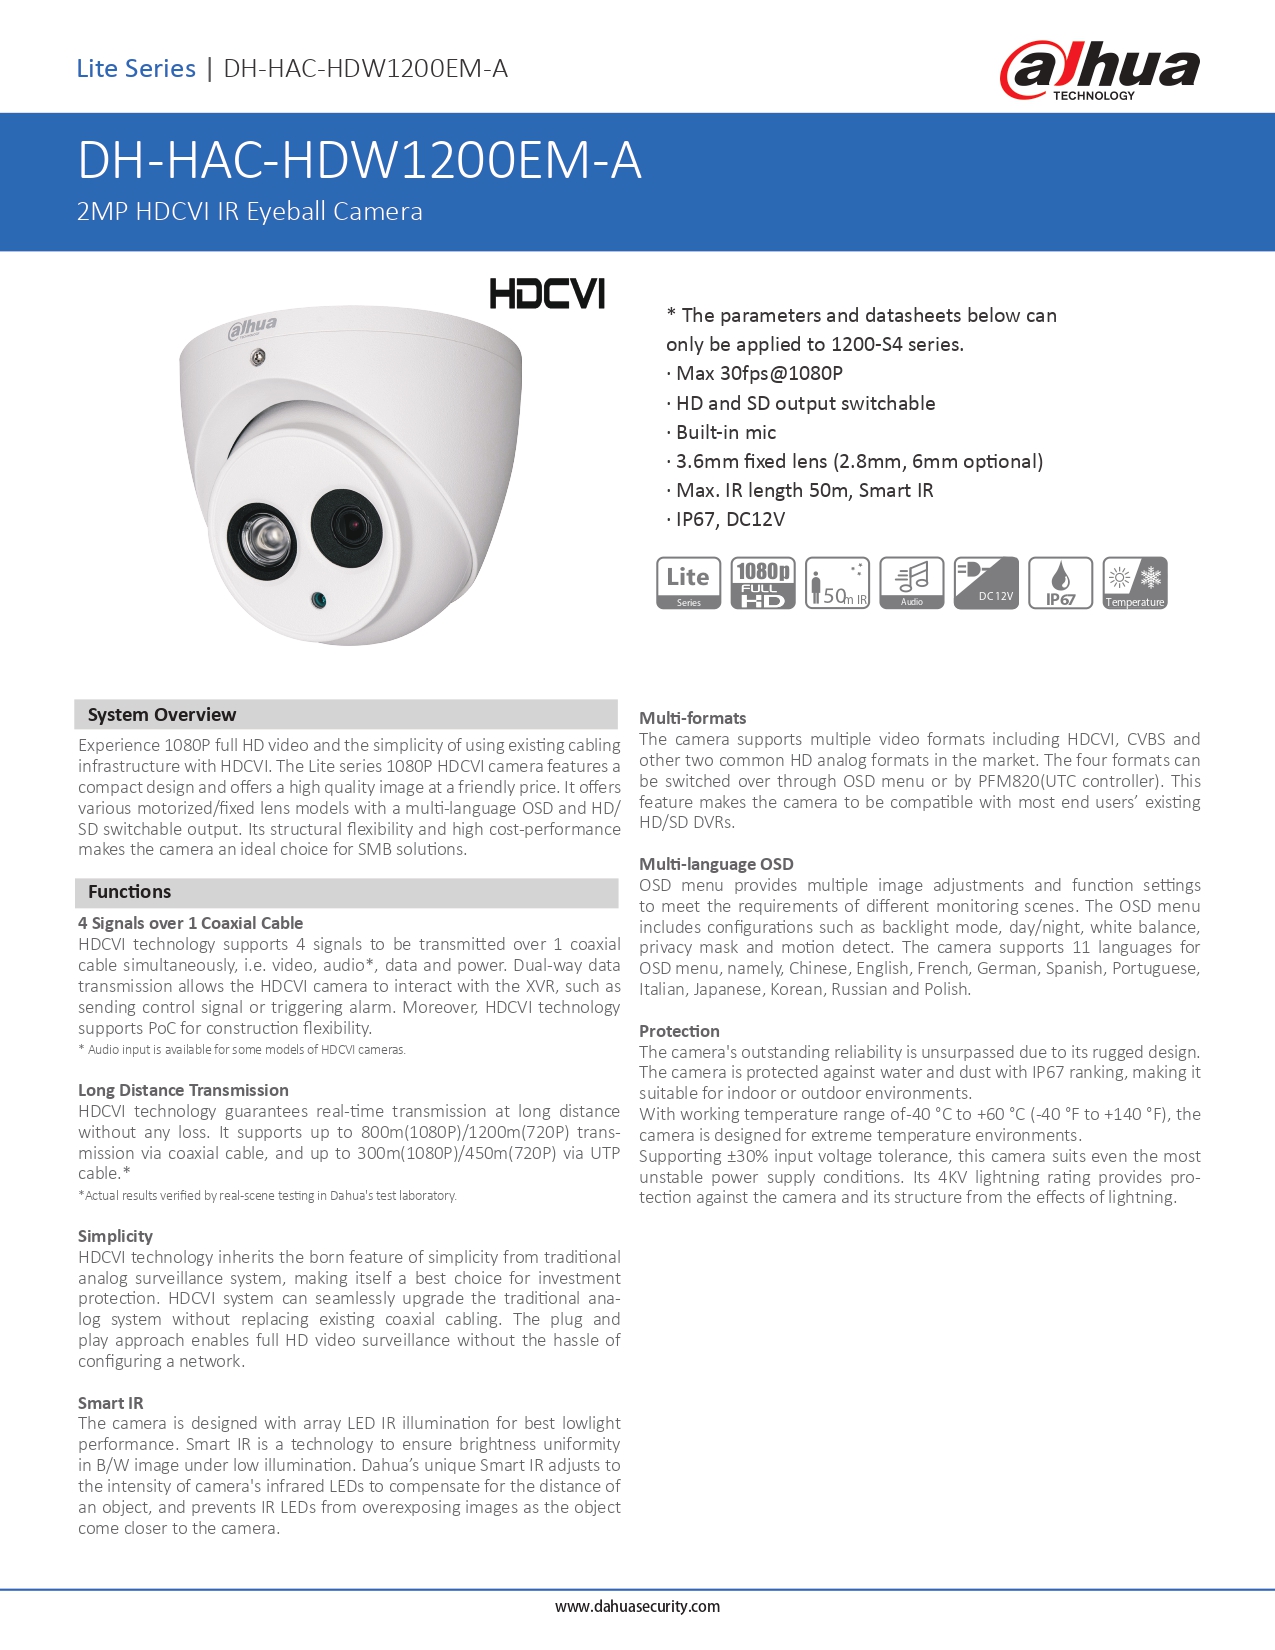 Dahua DH-HAC-HDW1200EM-A HD CCTV Camera Solution – 2 CAM Package | IR Night Vision | with Installation | Full HD 1080 | 24Hrs Recording